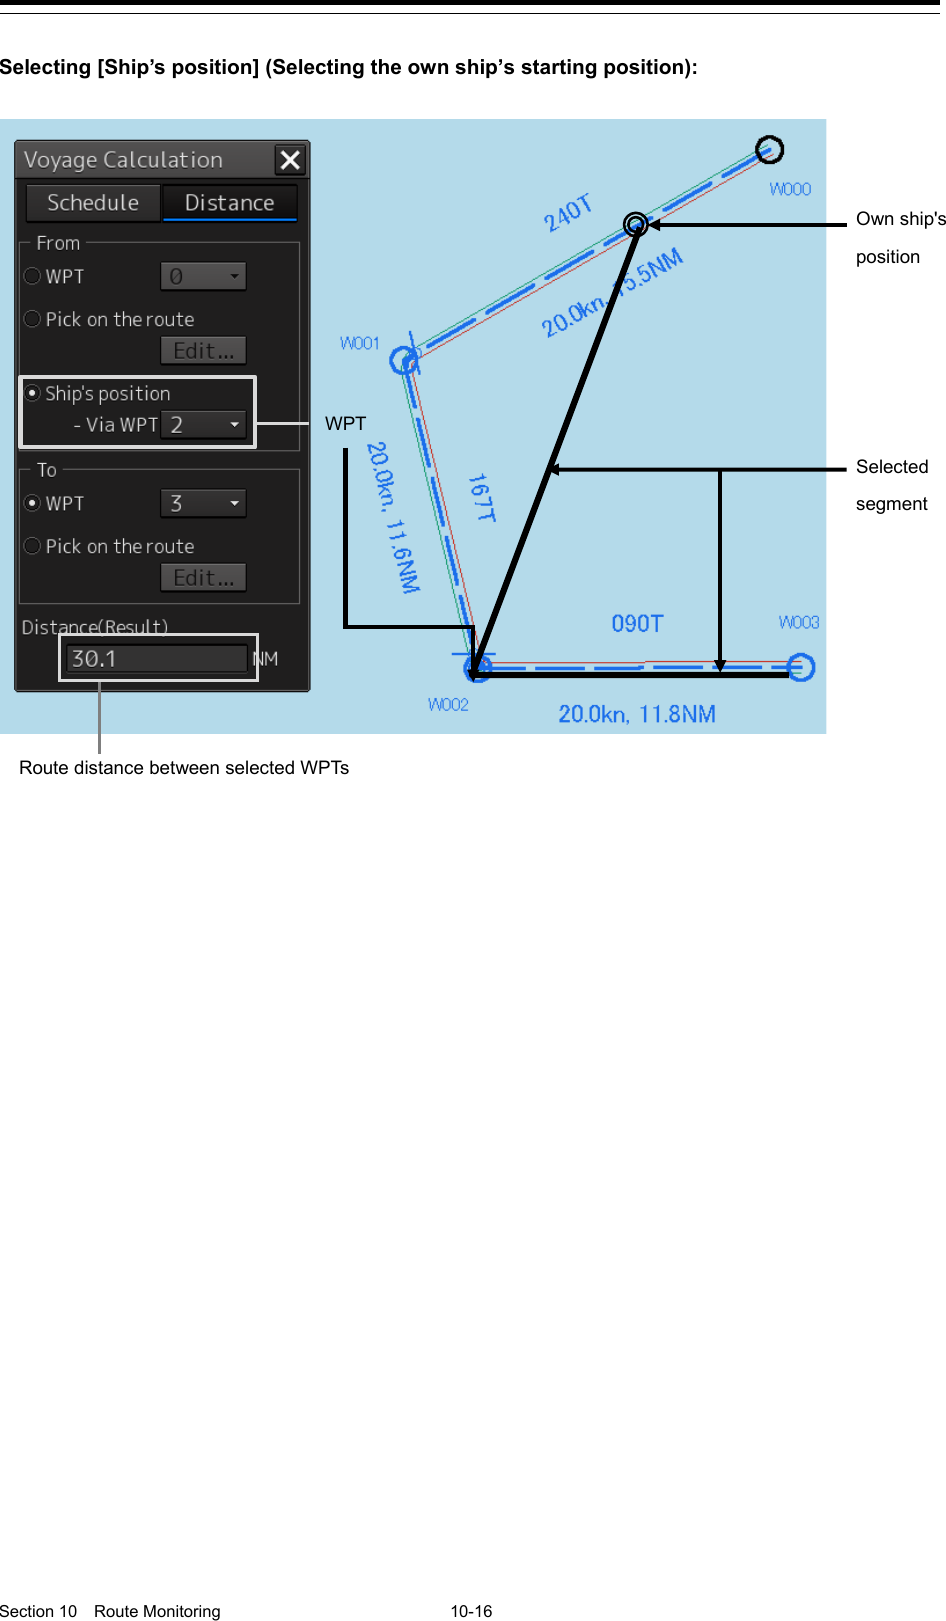   Section 10  Route Monitoring  10-16  Selecting [Ship’s position] (Selecting the own ship’s starting position):      Selected segment  WPT  Route distance between selected WPTs     Own ship&apos;s position 